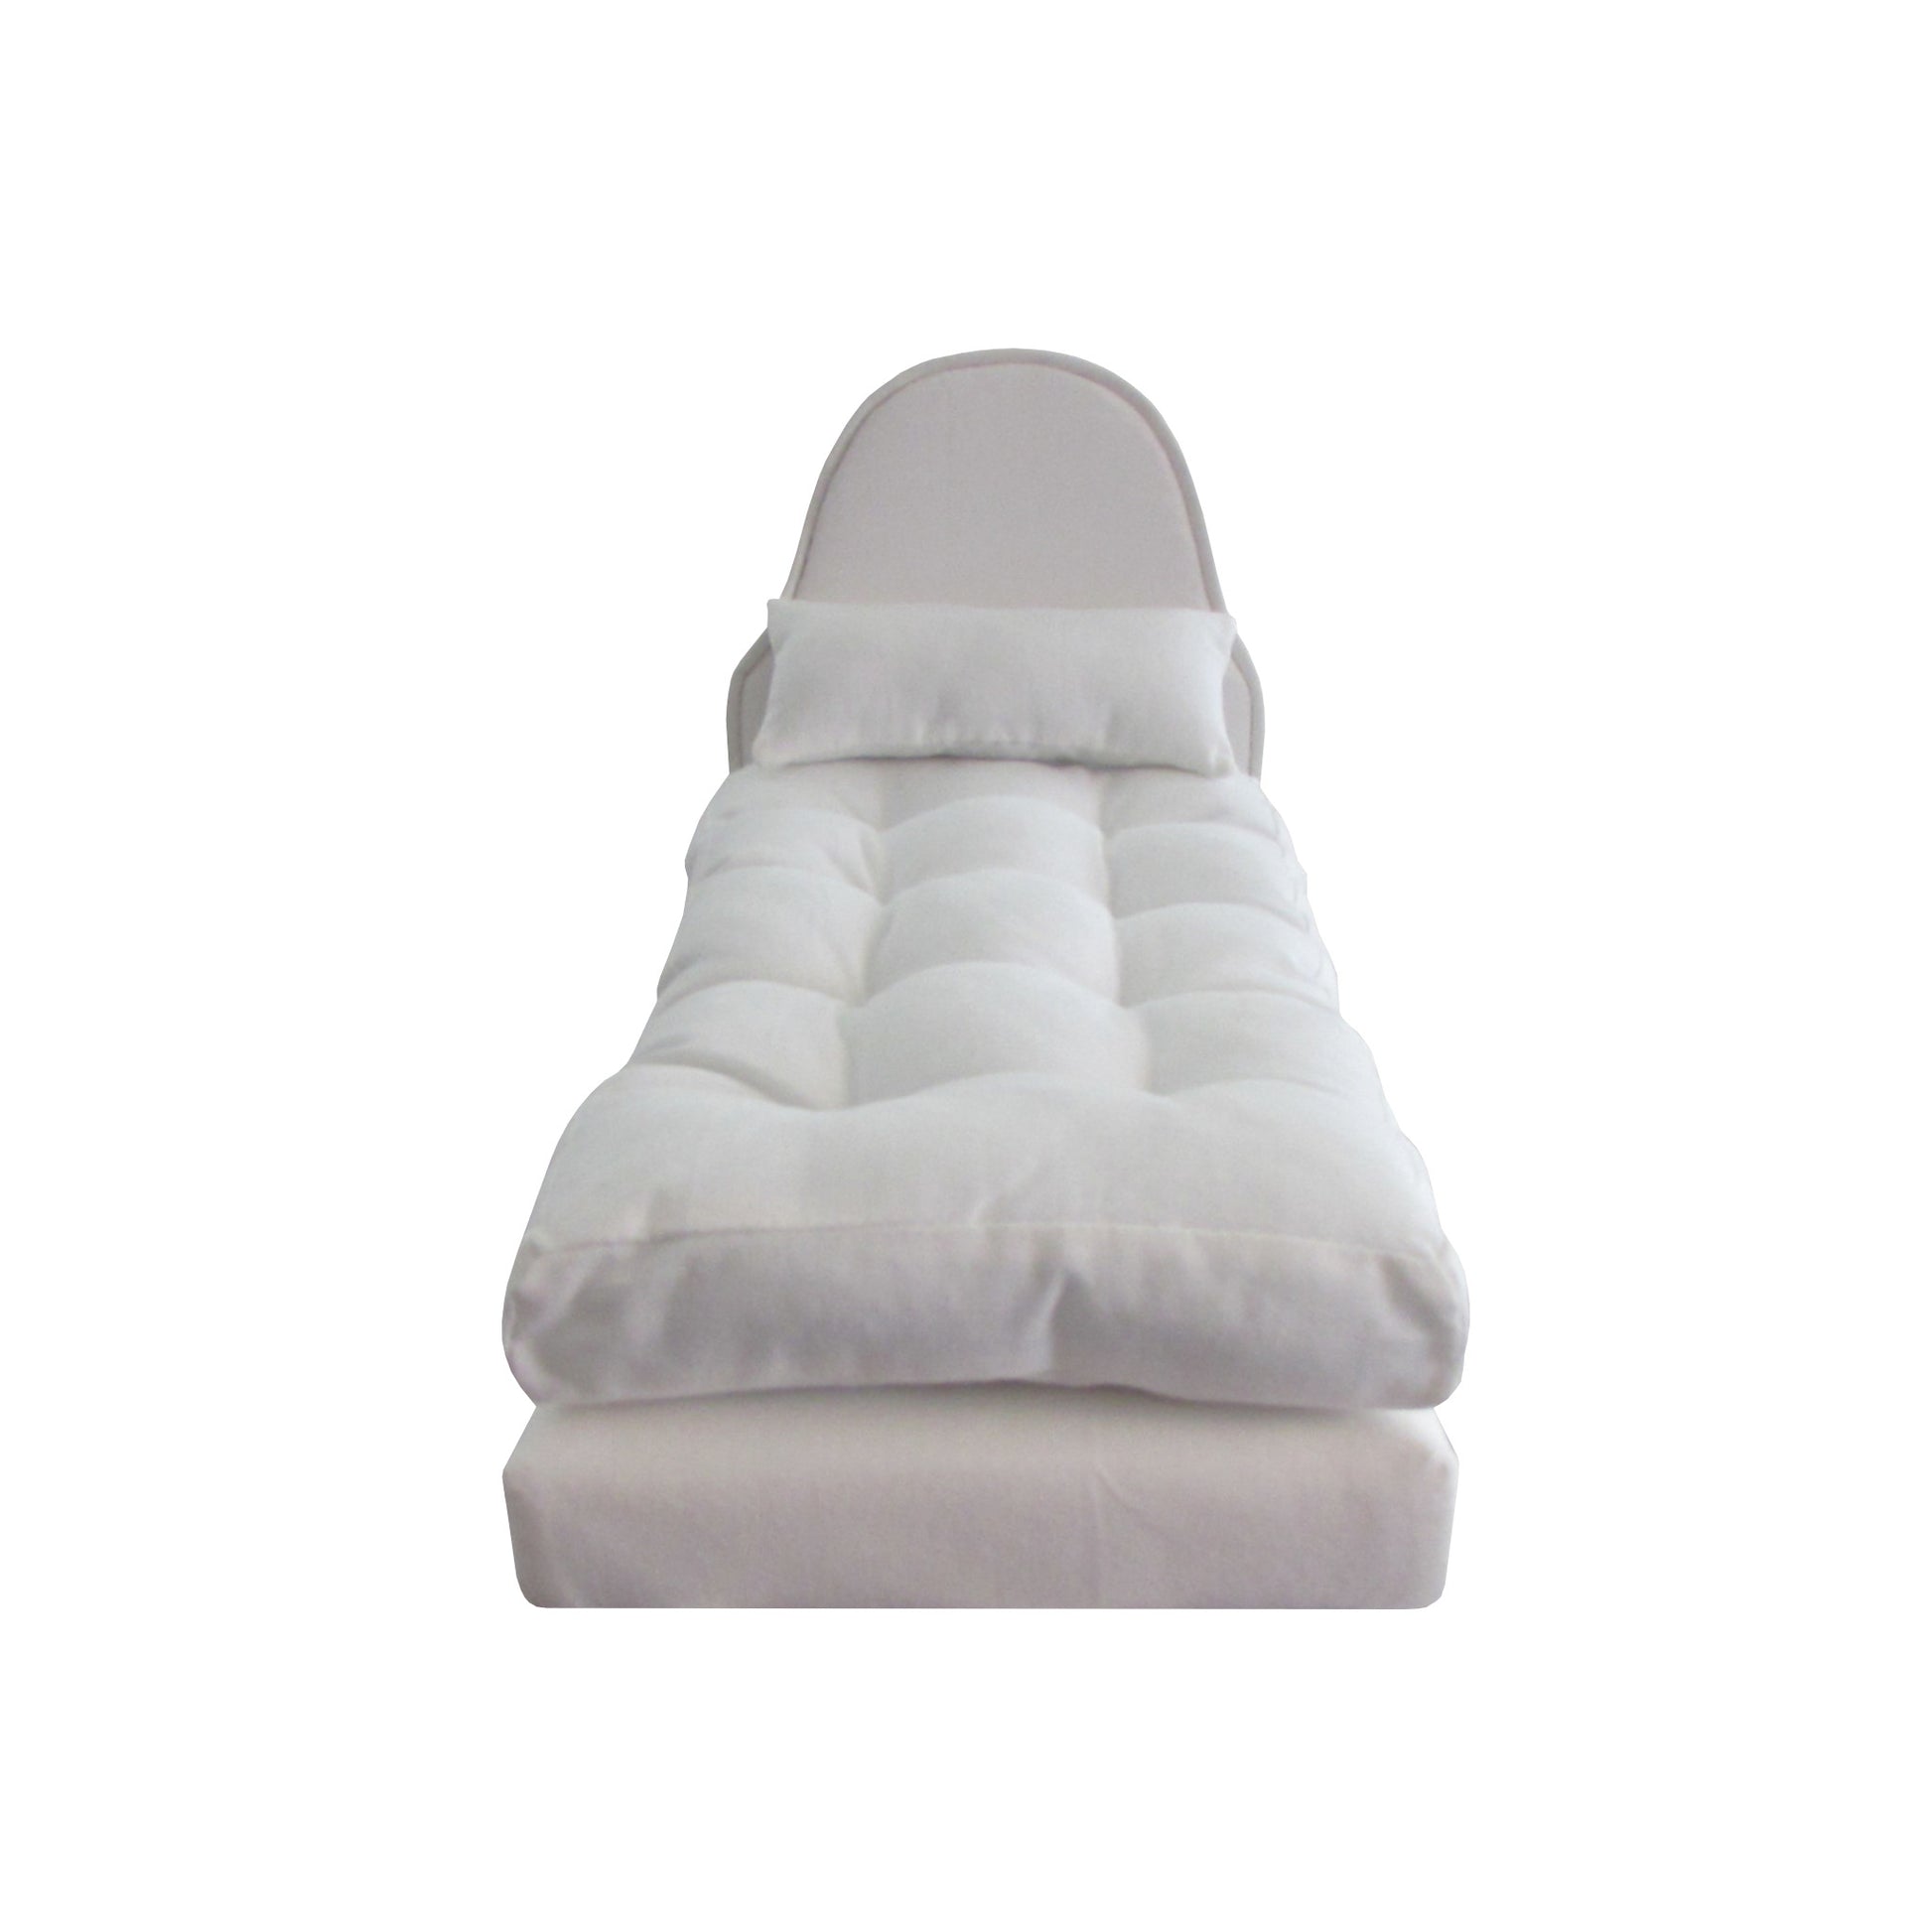 Upholstered White Doll Bed and Mattress for 11.5-inch and 12-inch dolls Front view